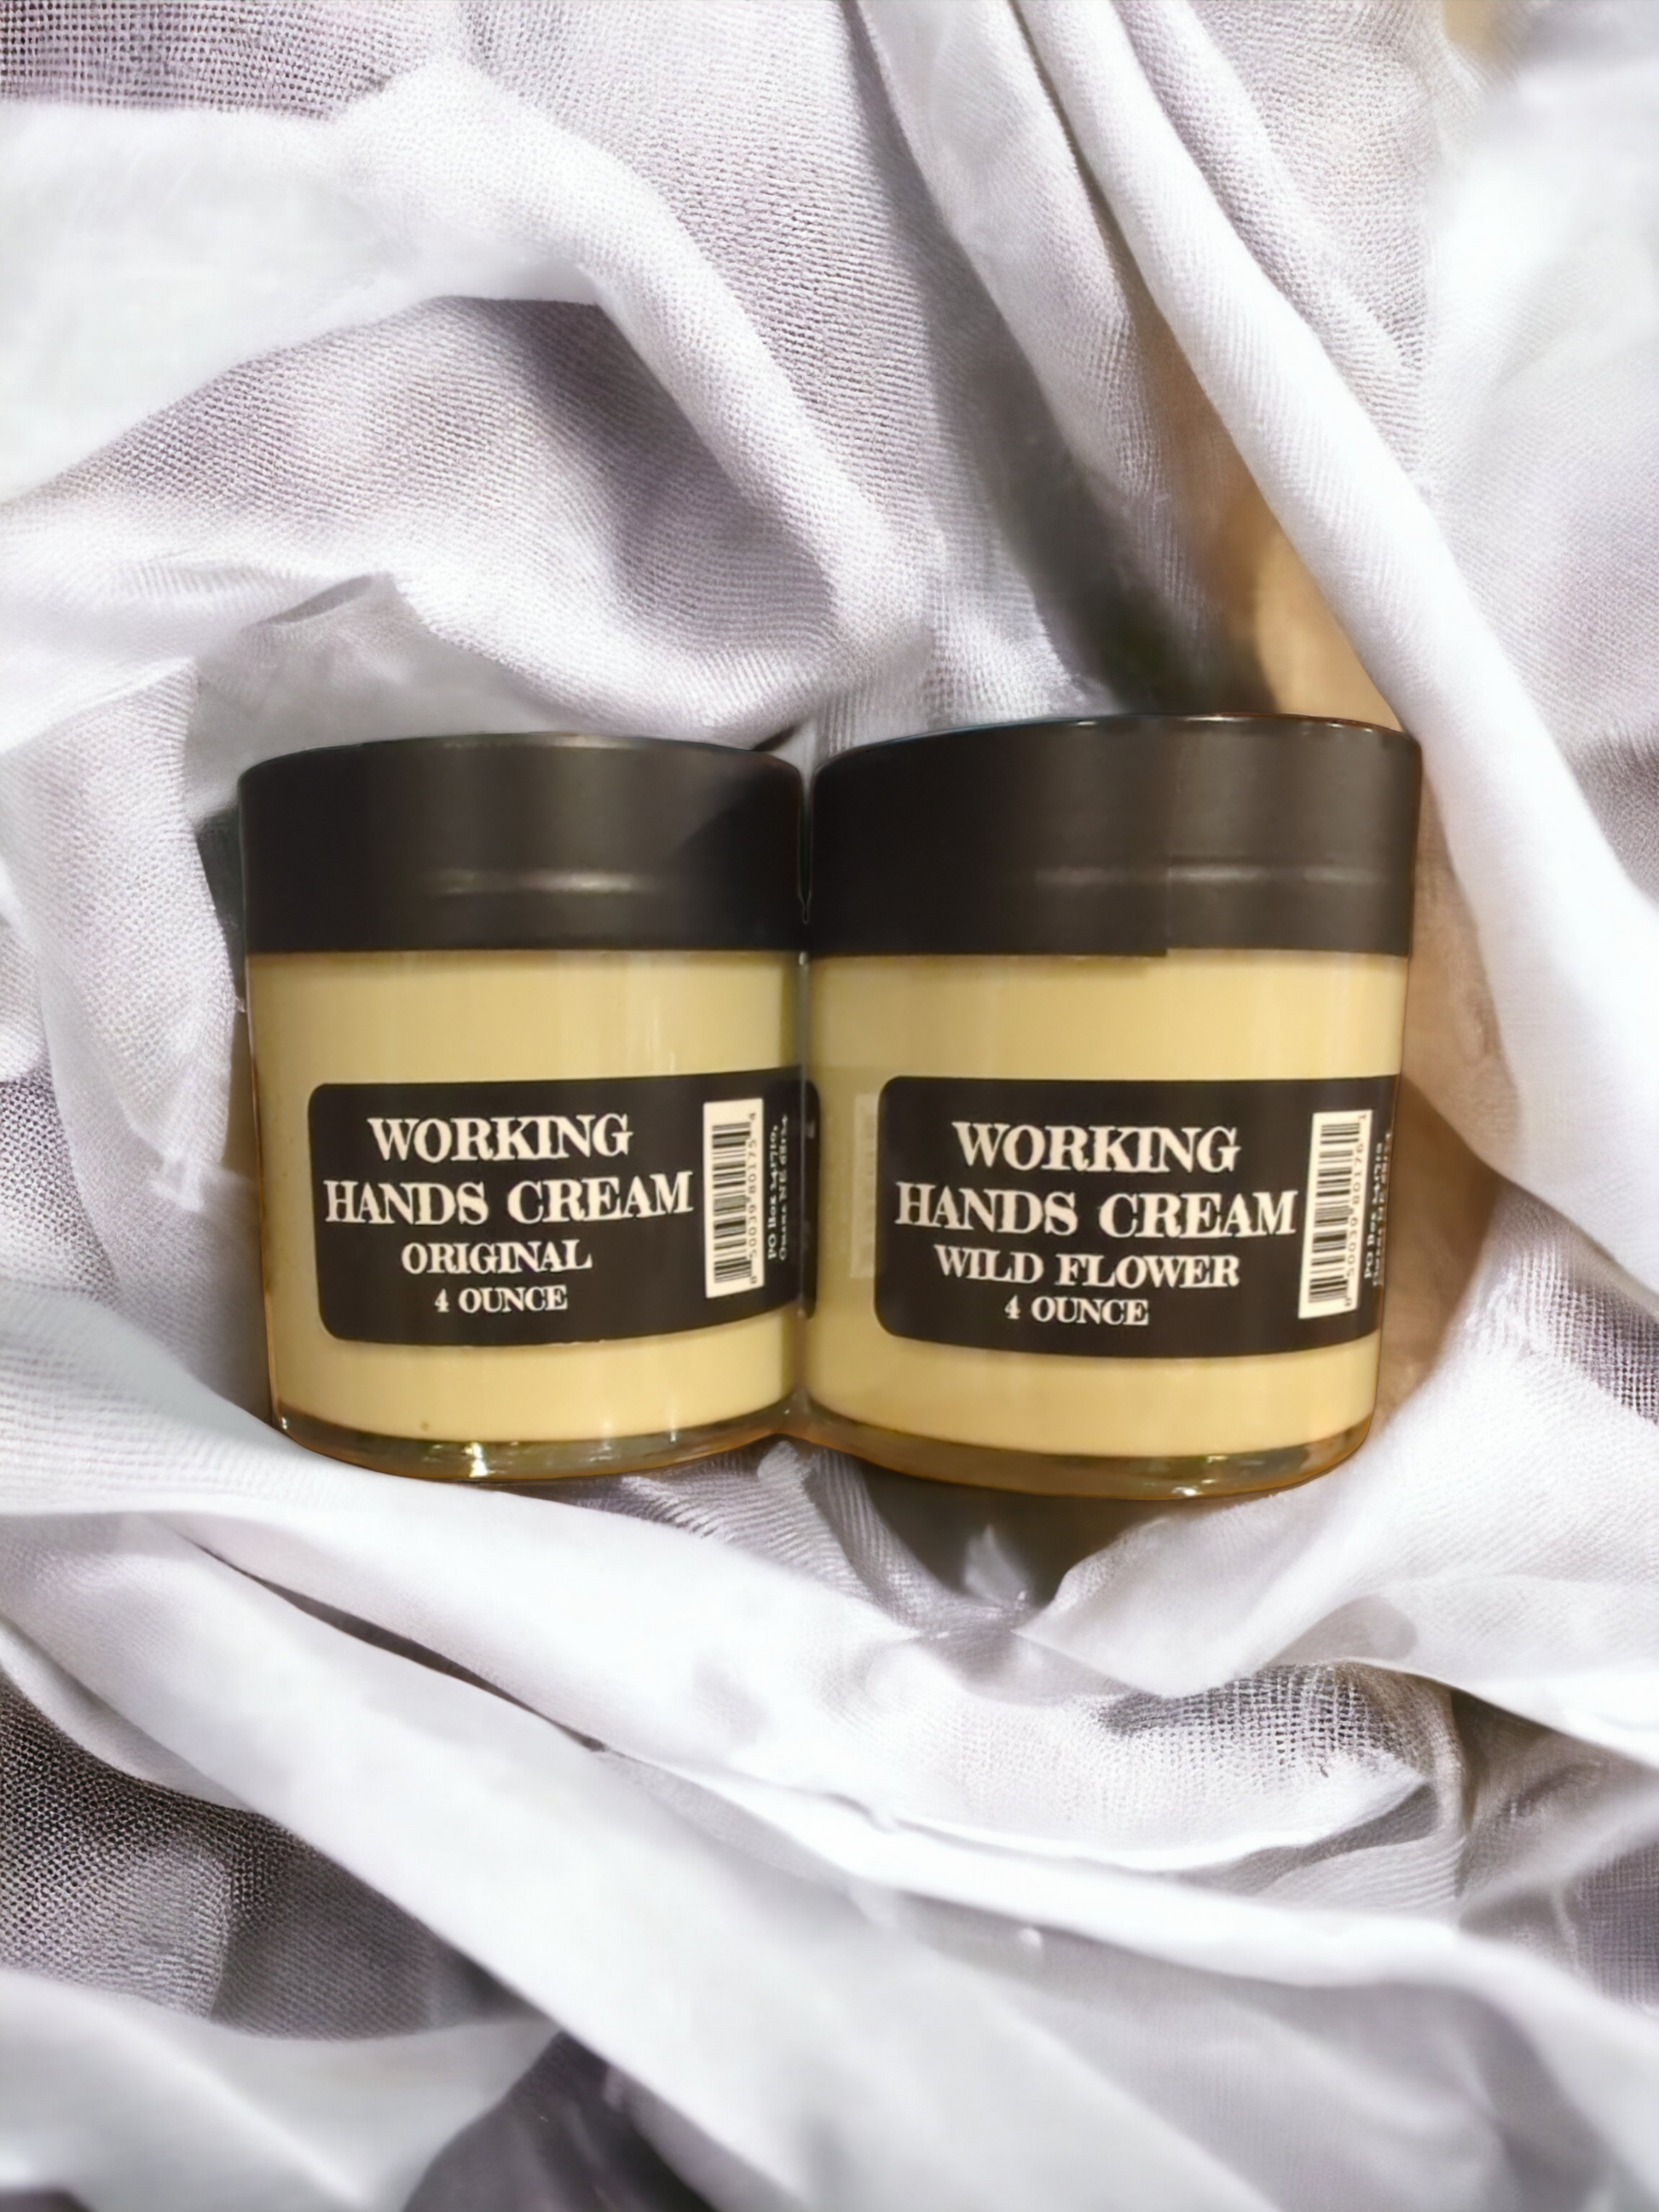 Working Hands cream both scent options, 4 ounce glass on fabric, Apothecuryous